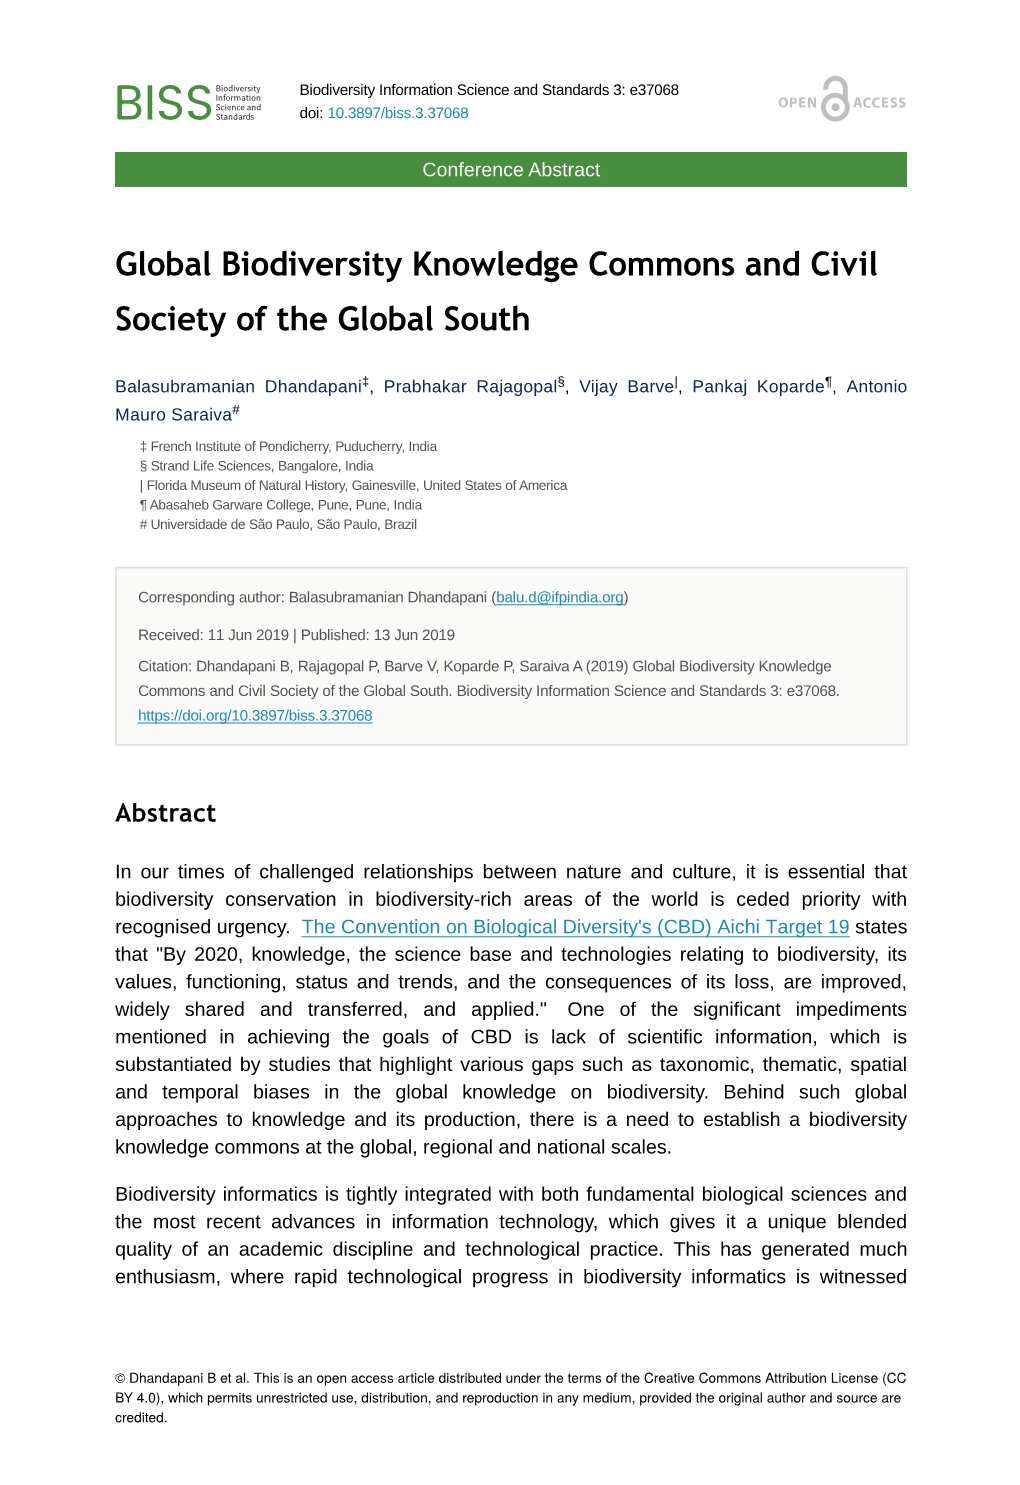 Global Biodiversity Knowledge Commons and Civil Society of the Global South